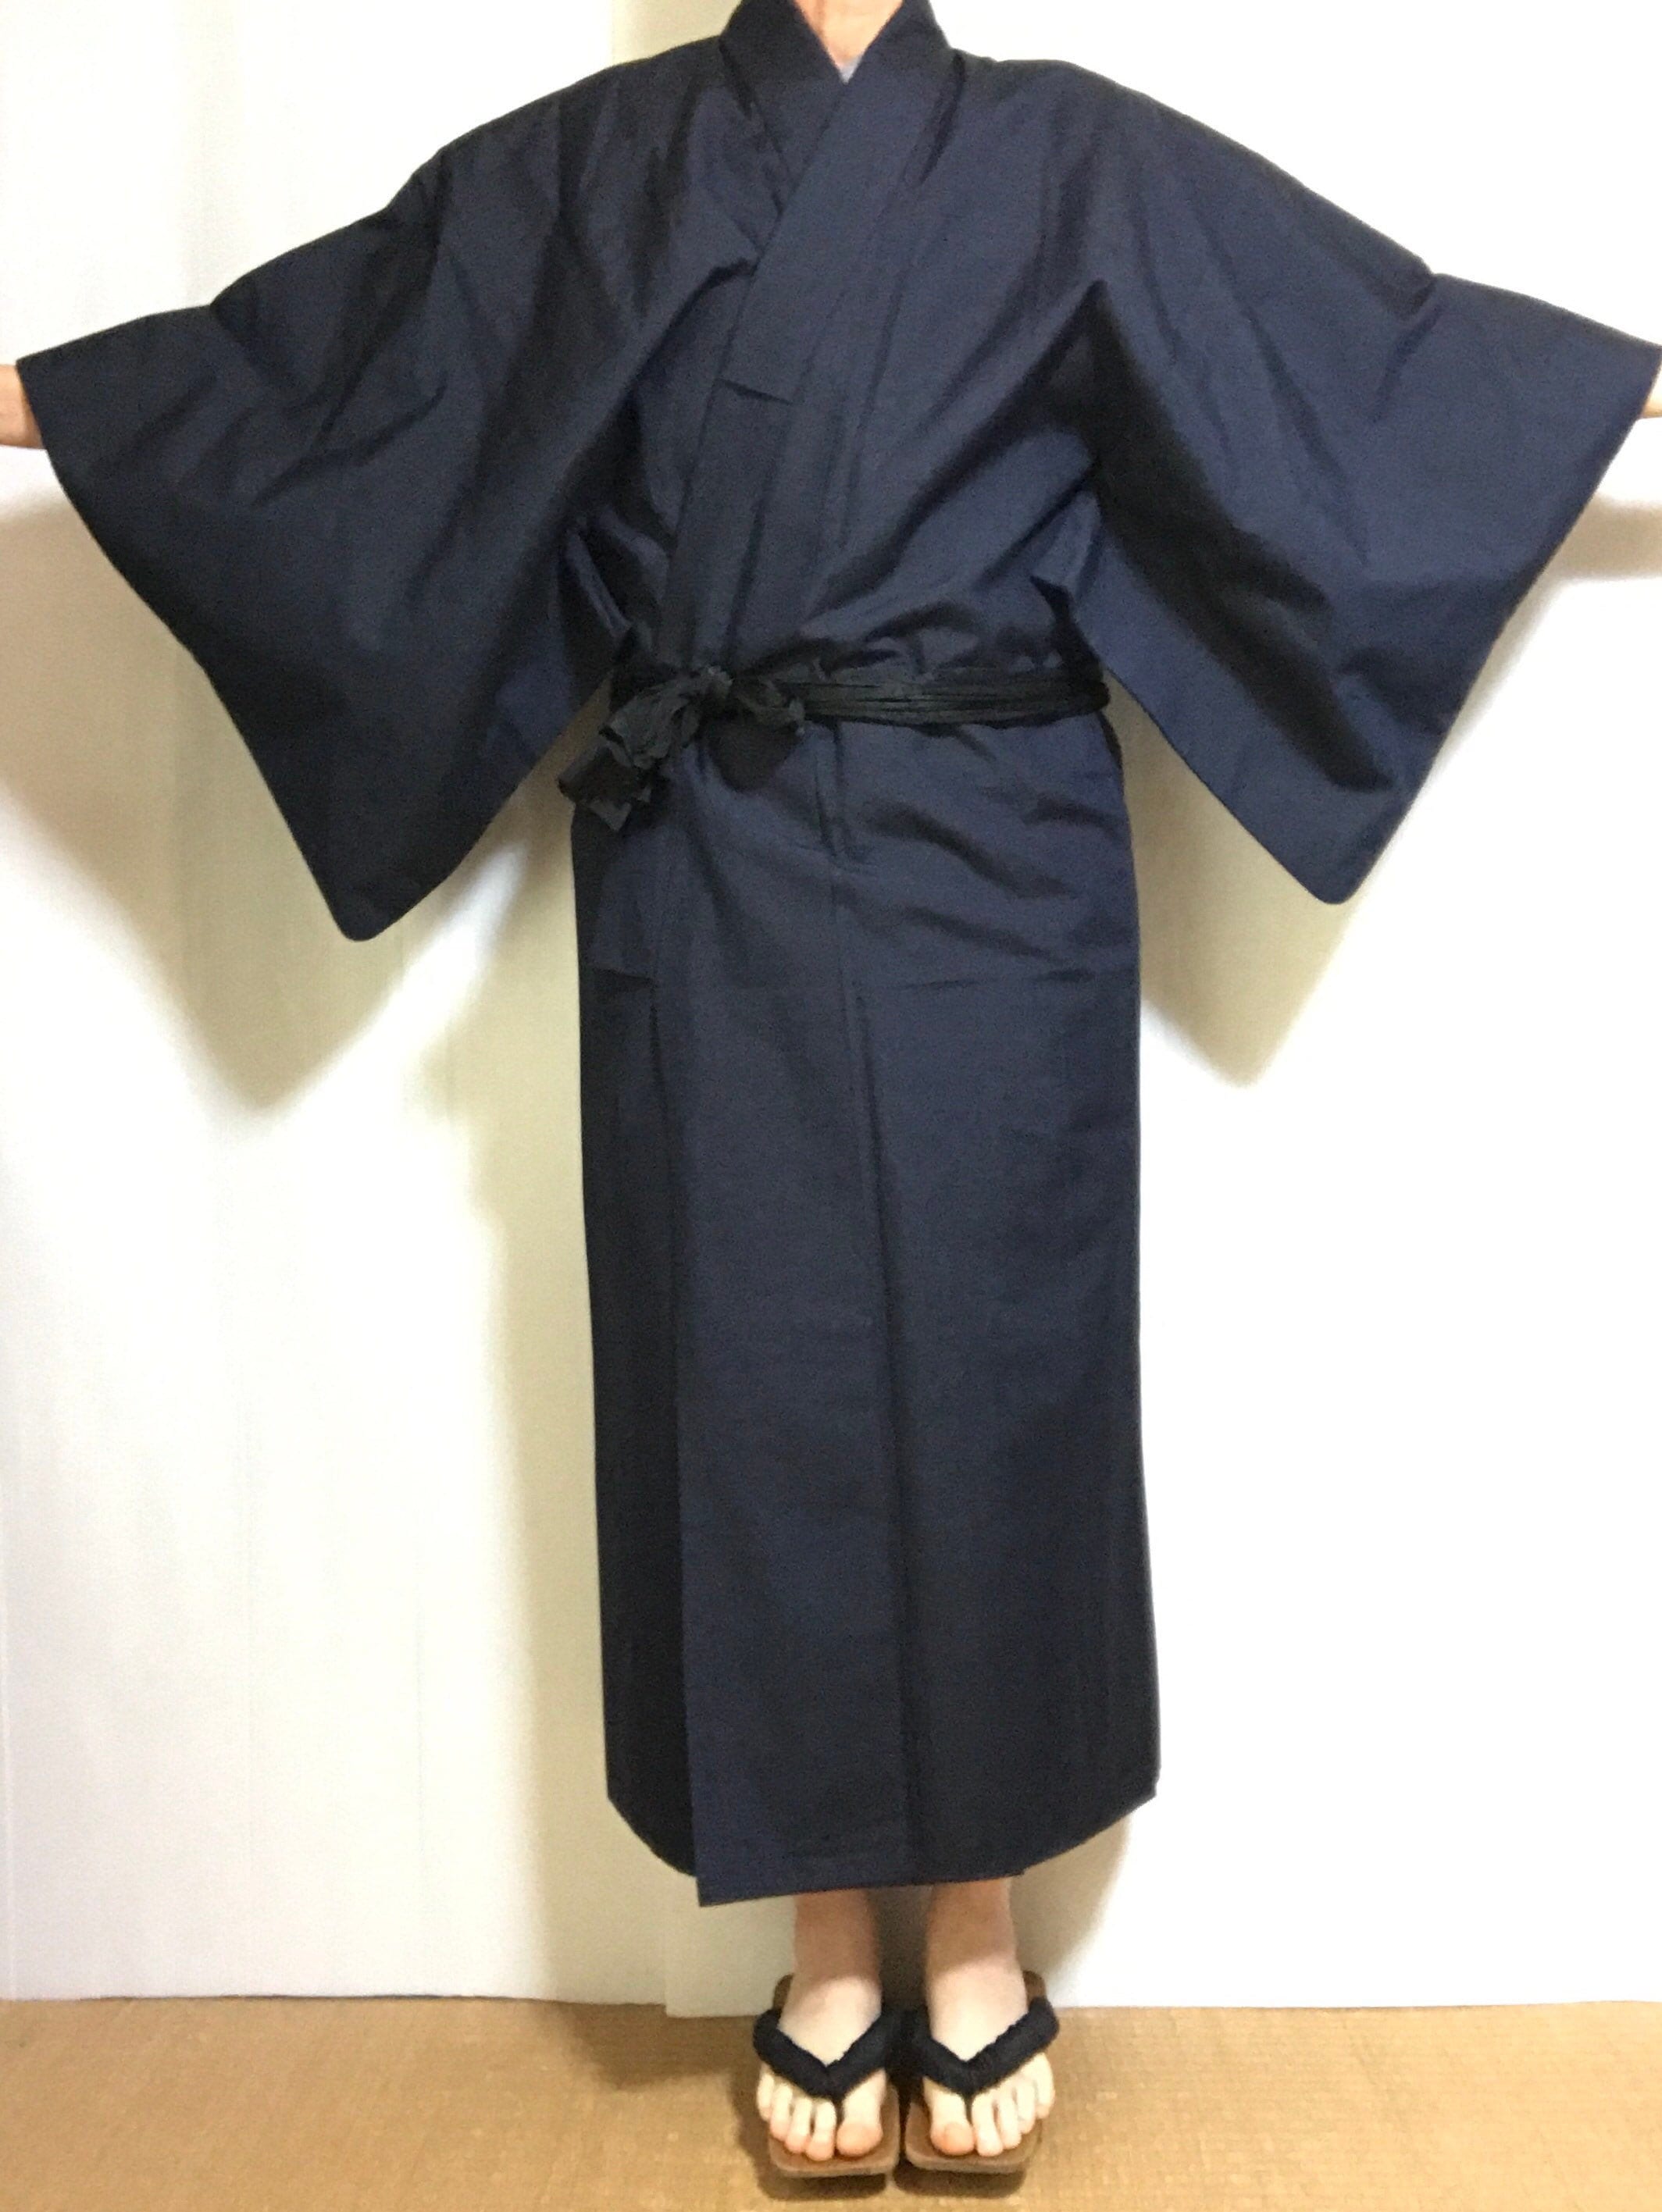 Mens Kimono Robe Japanese Wool Blend Excellent Vintage Long Oriental Dressing Gown Navy Blue Size M - Express Shipping Included